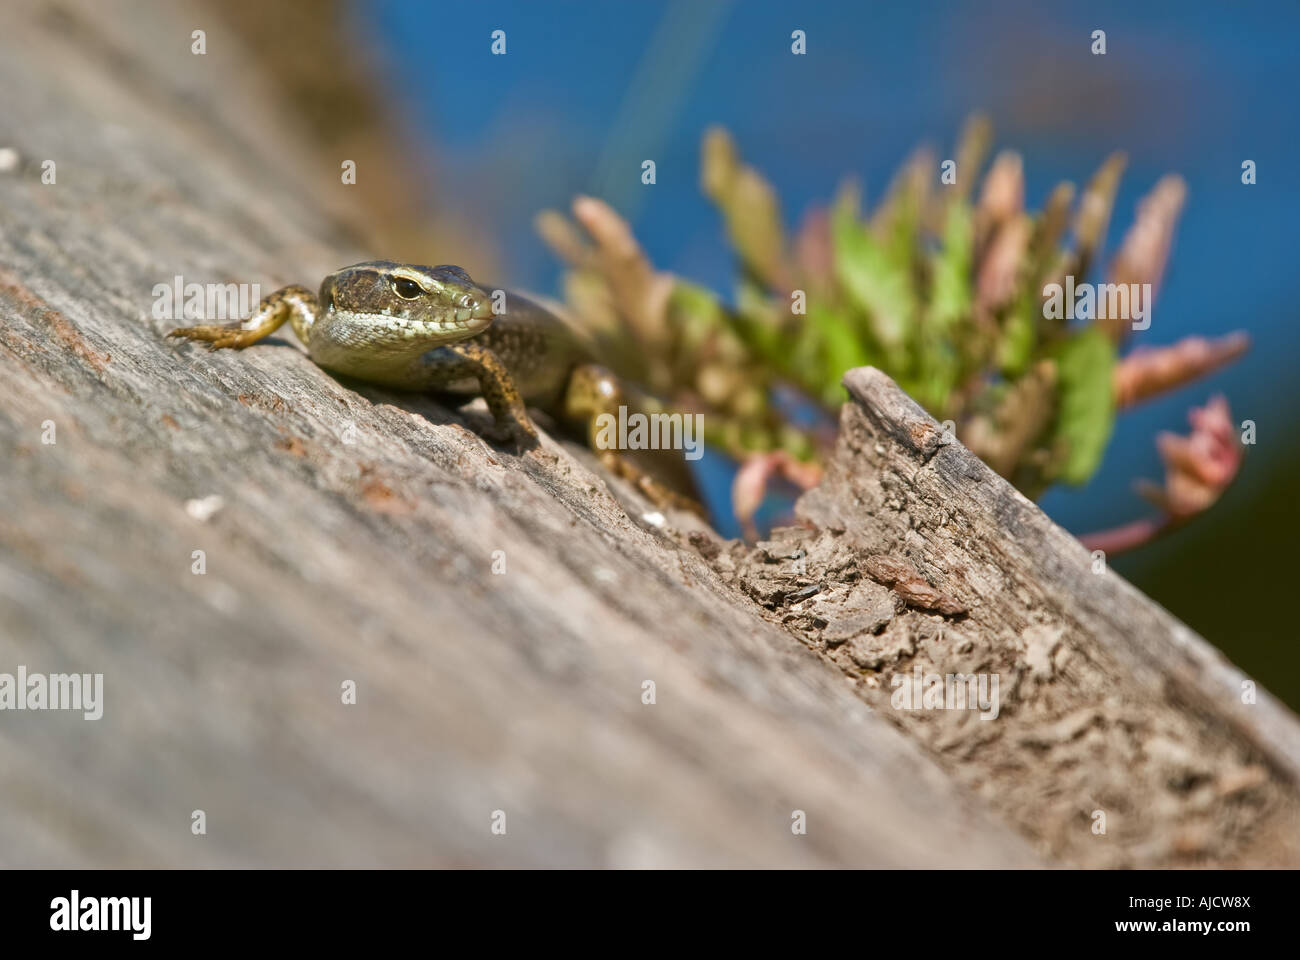 a eastern water skink lizard lays on a log Stock Photo